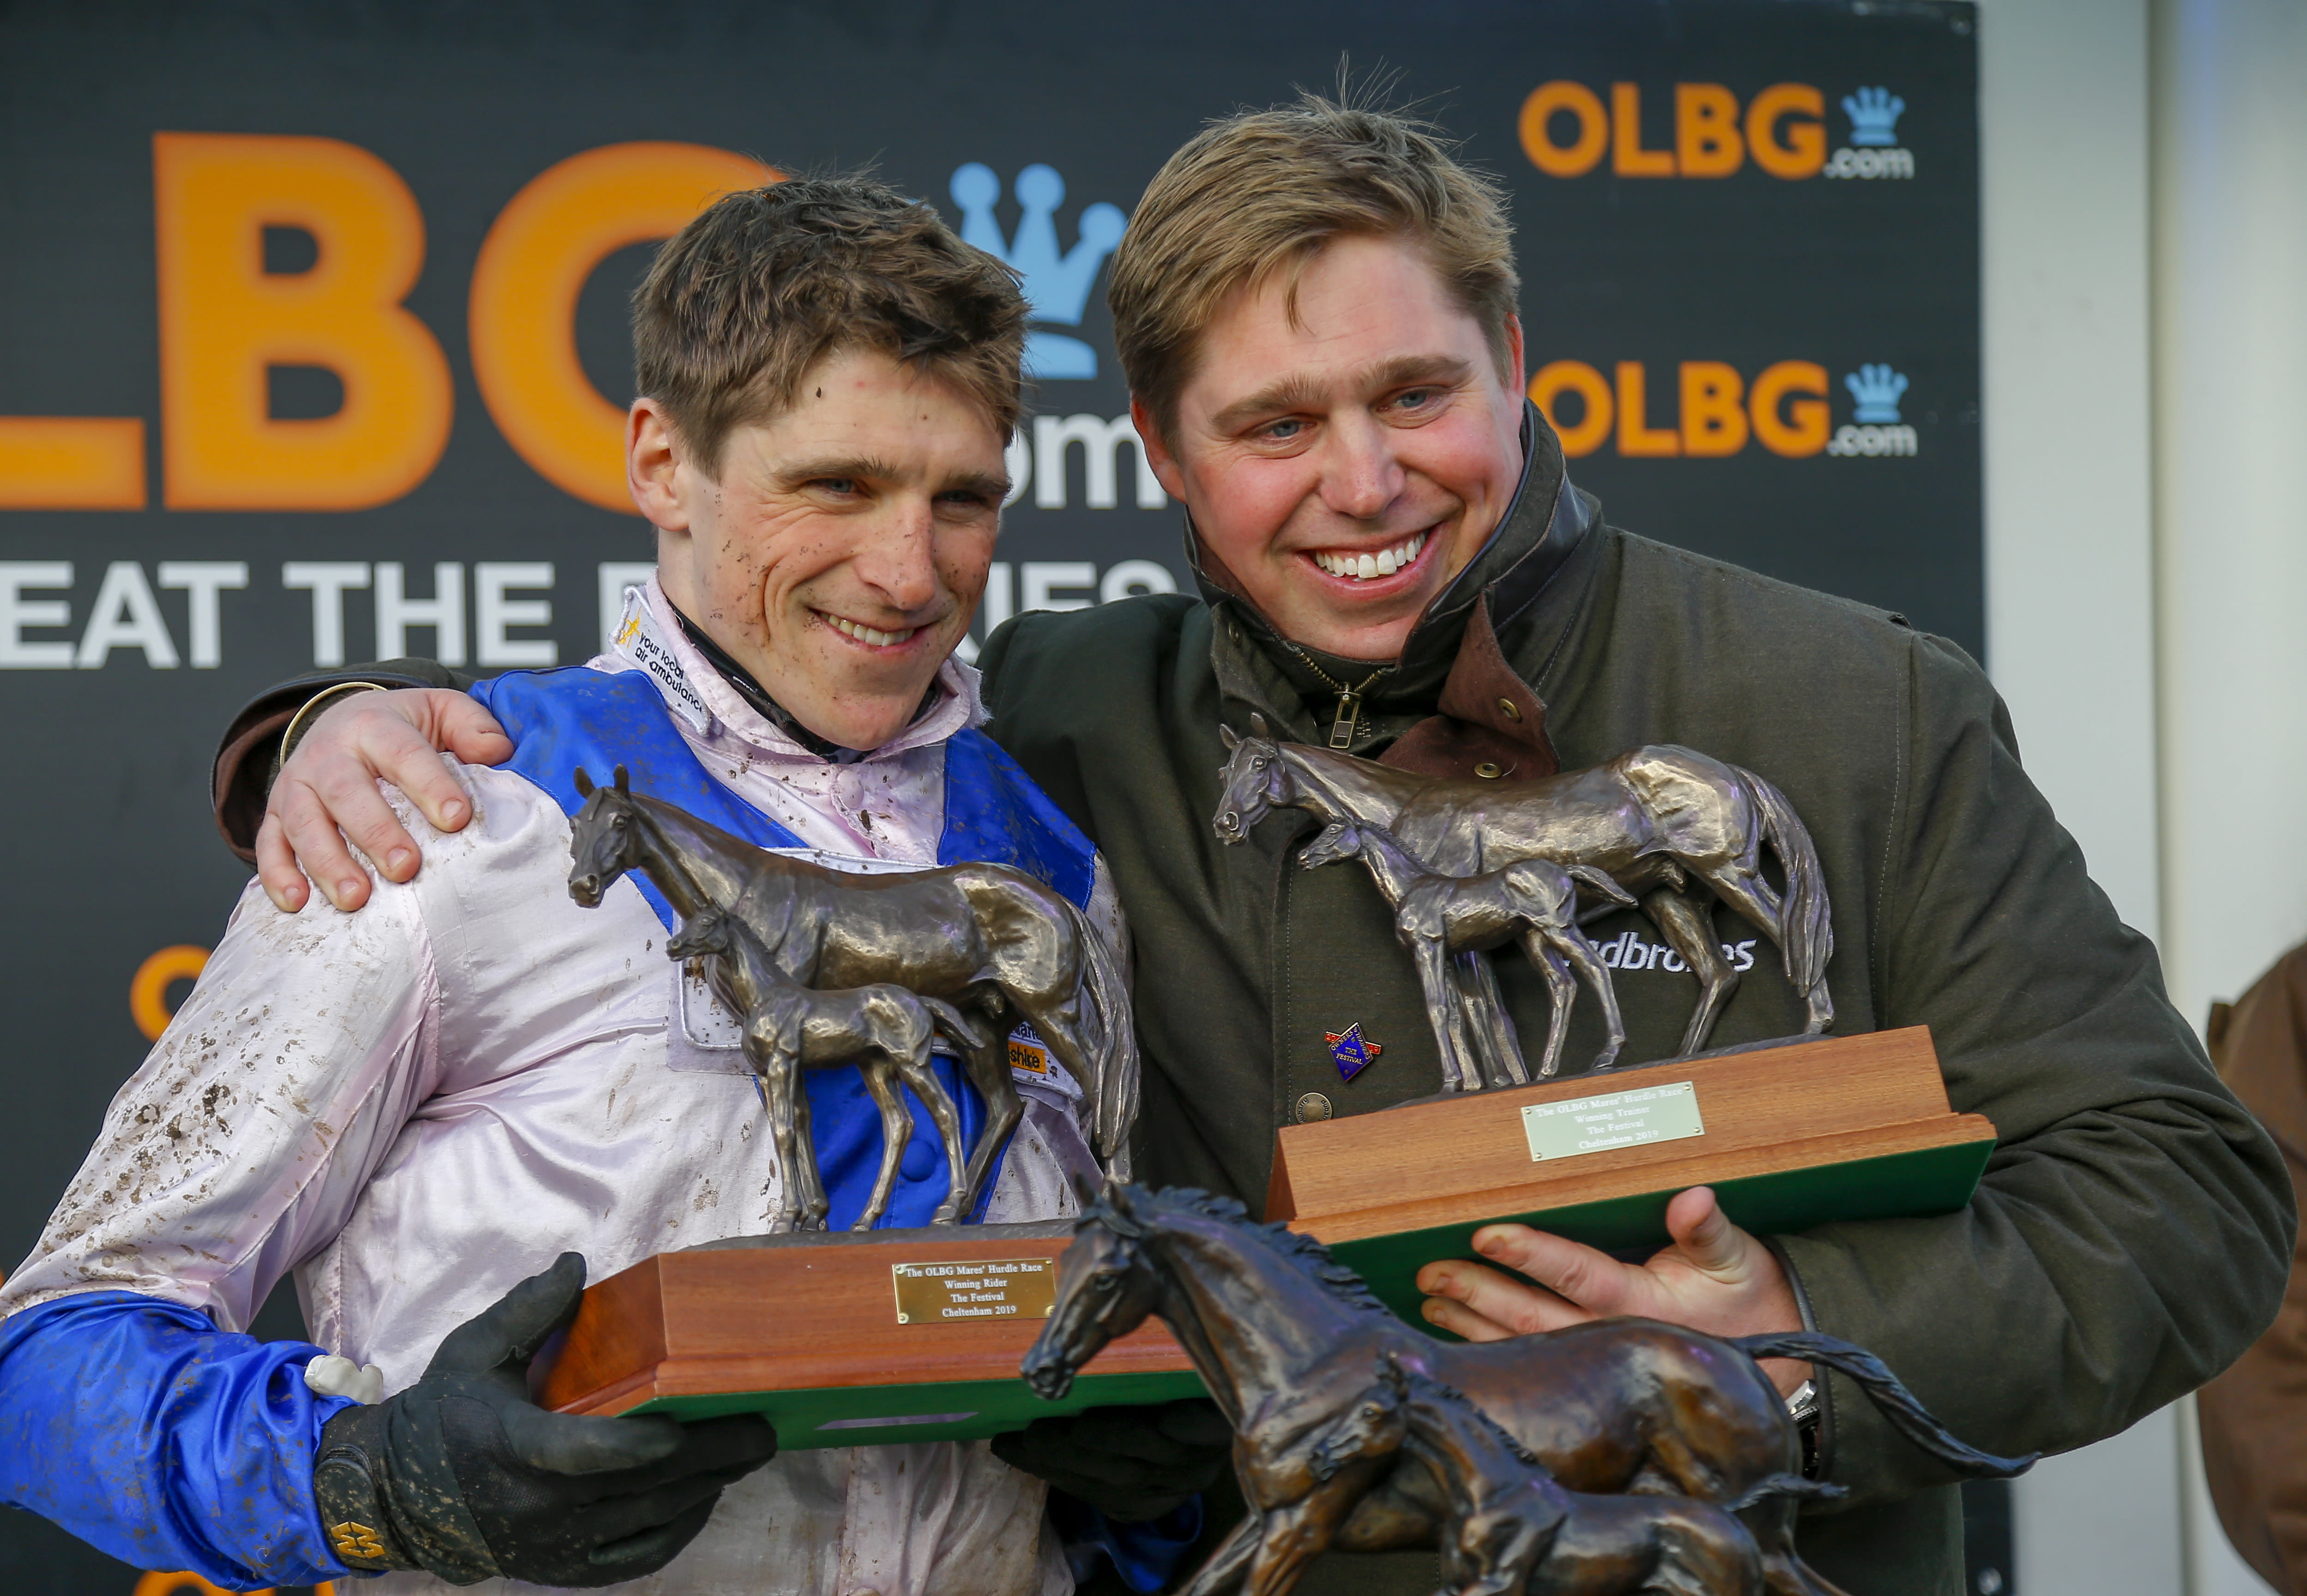  Harry and Dan Skelton will be in thenthick of the action at Aintree